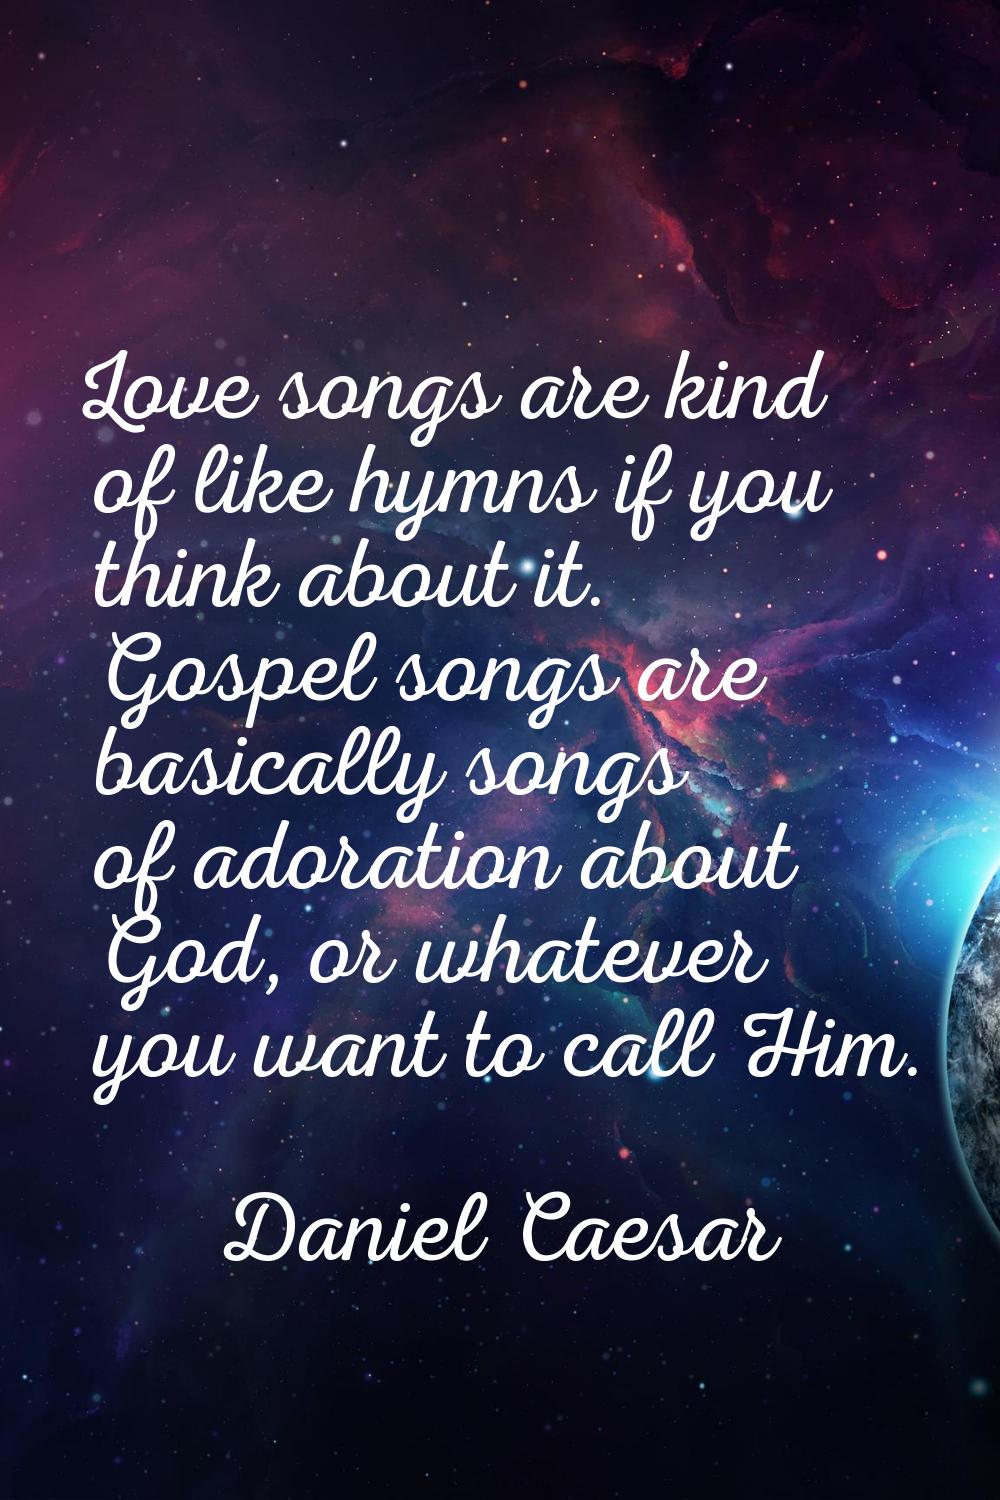 Love songs are kind of like hymns if you think about it. Gospel songs are basically songs of adorat